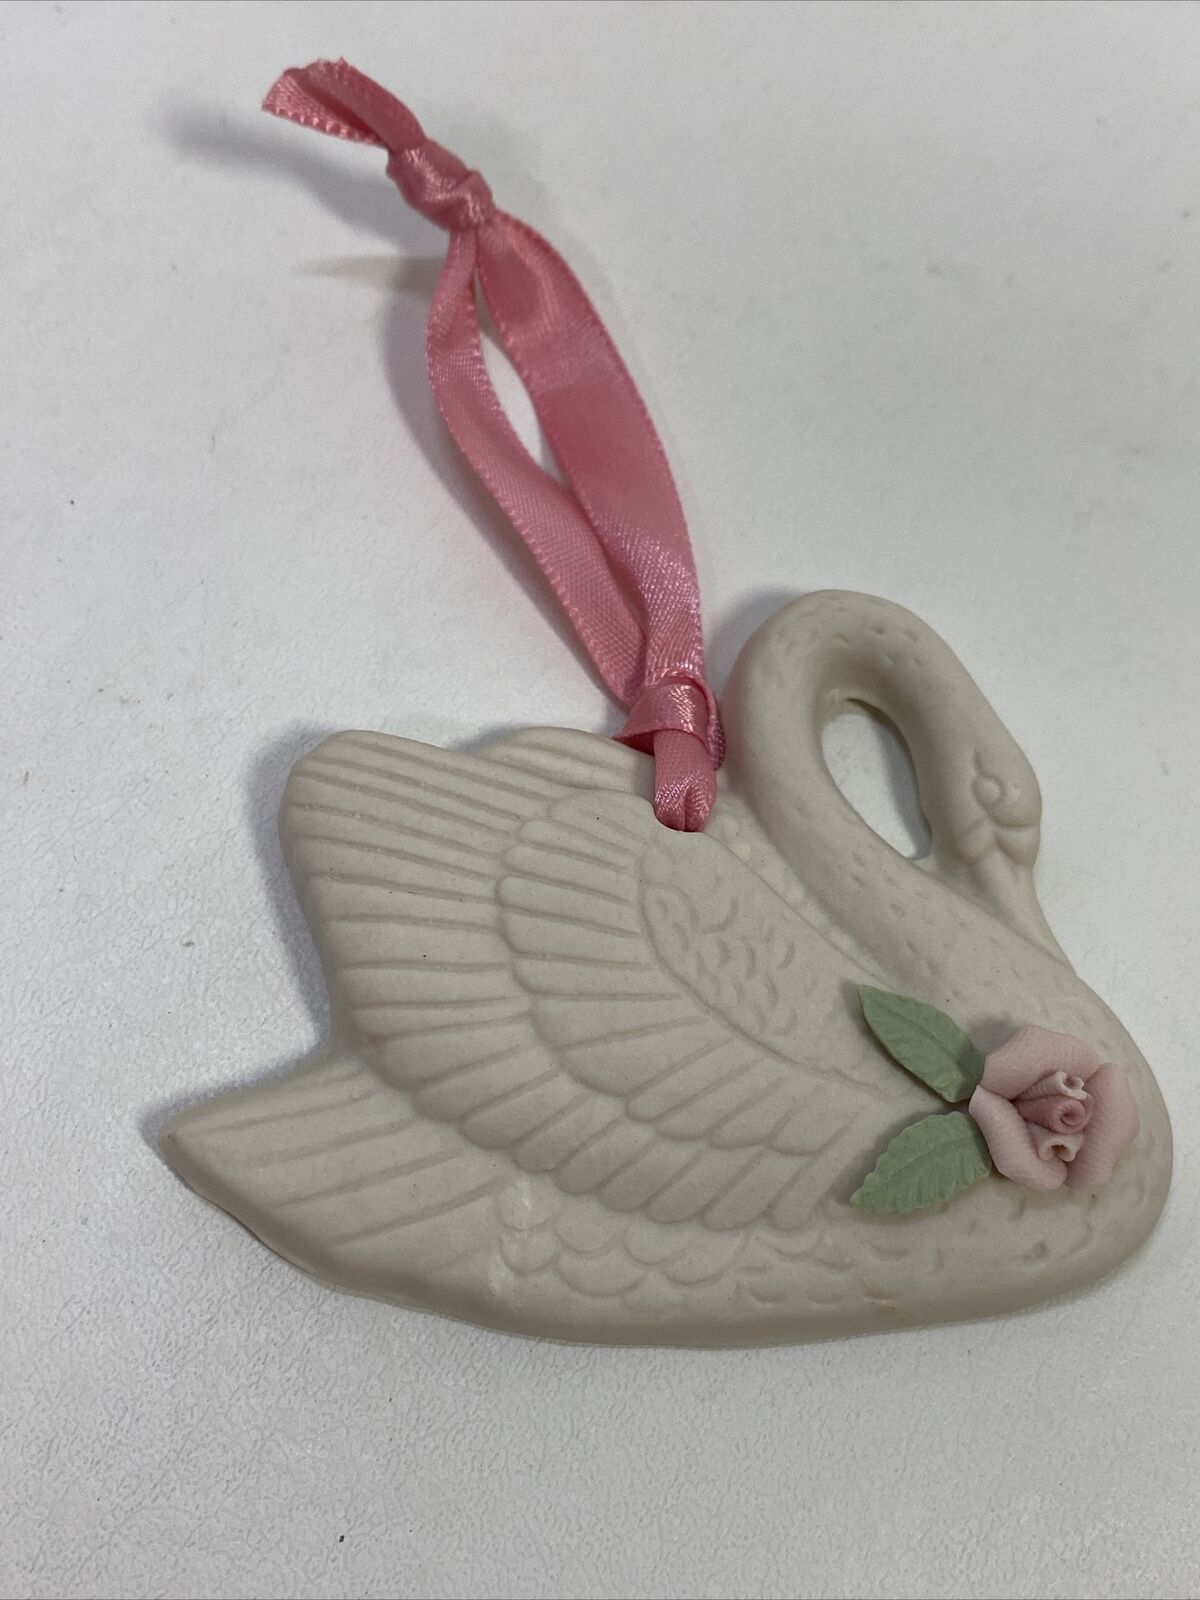 1928 Porcelain Ornament Stunning Swan Porcelain From The Jewelry Company